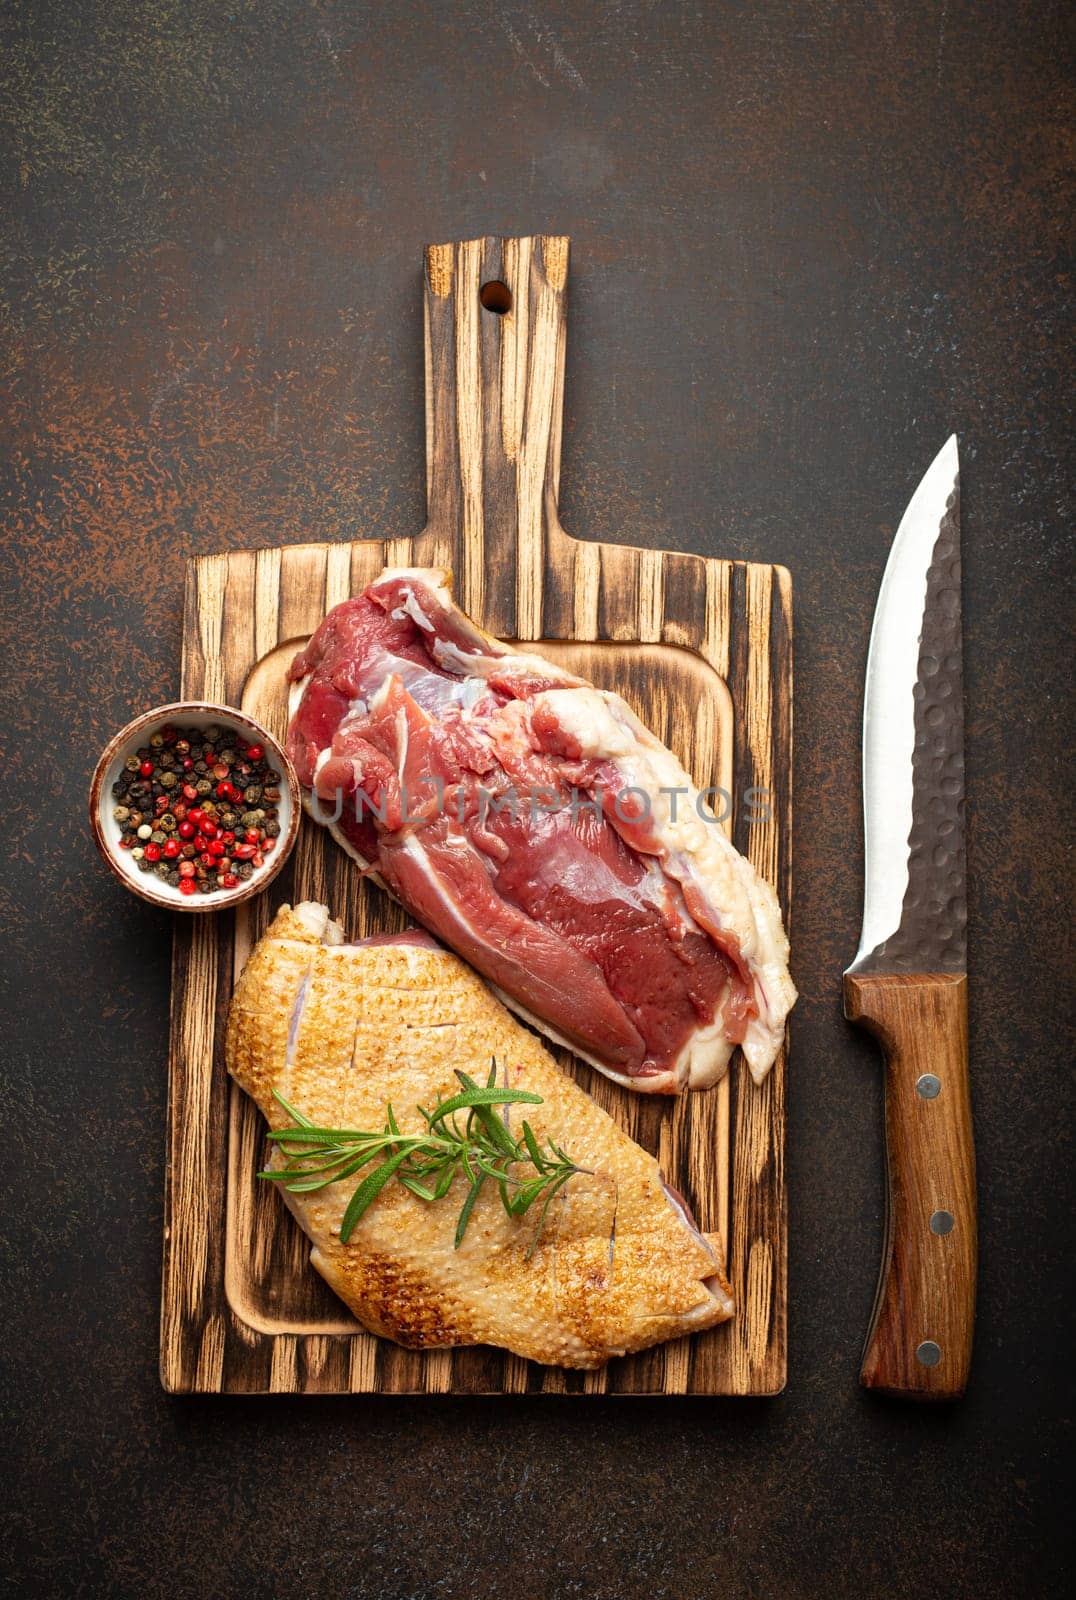 Two raw uncooked duck breast fillets with skin, seasoned with salt, pepper, rosemary top view on wooden cutting board with knife, dark brown concrete rustic background by its_al_dente